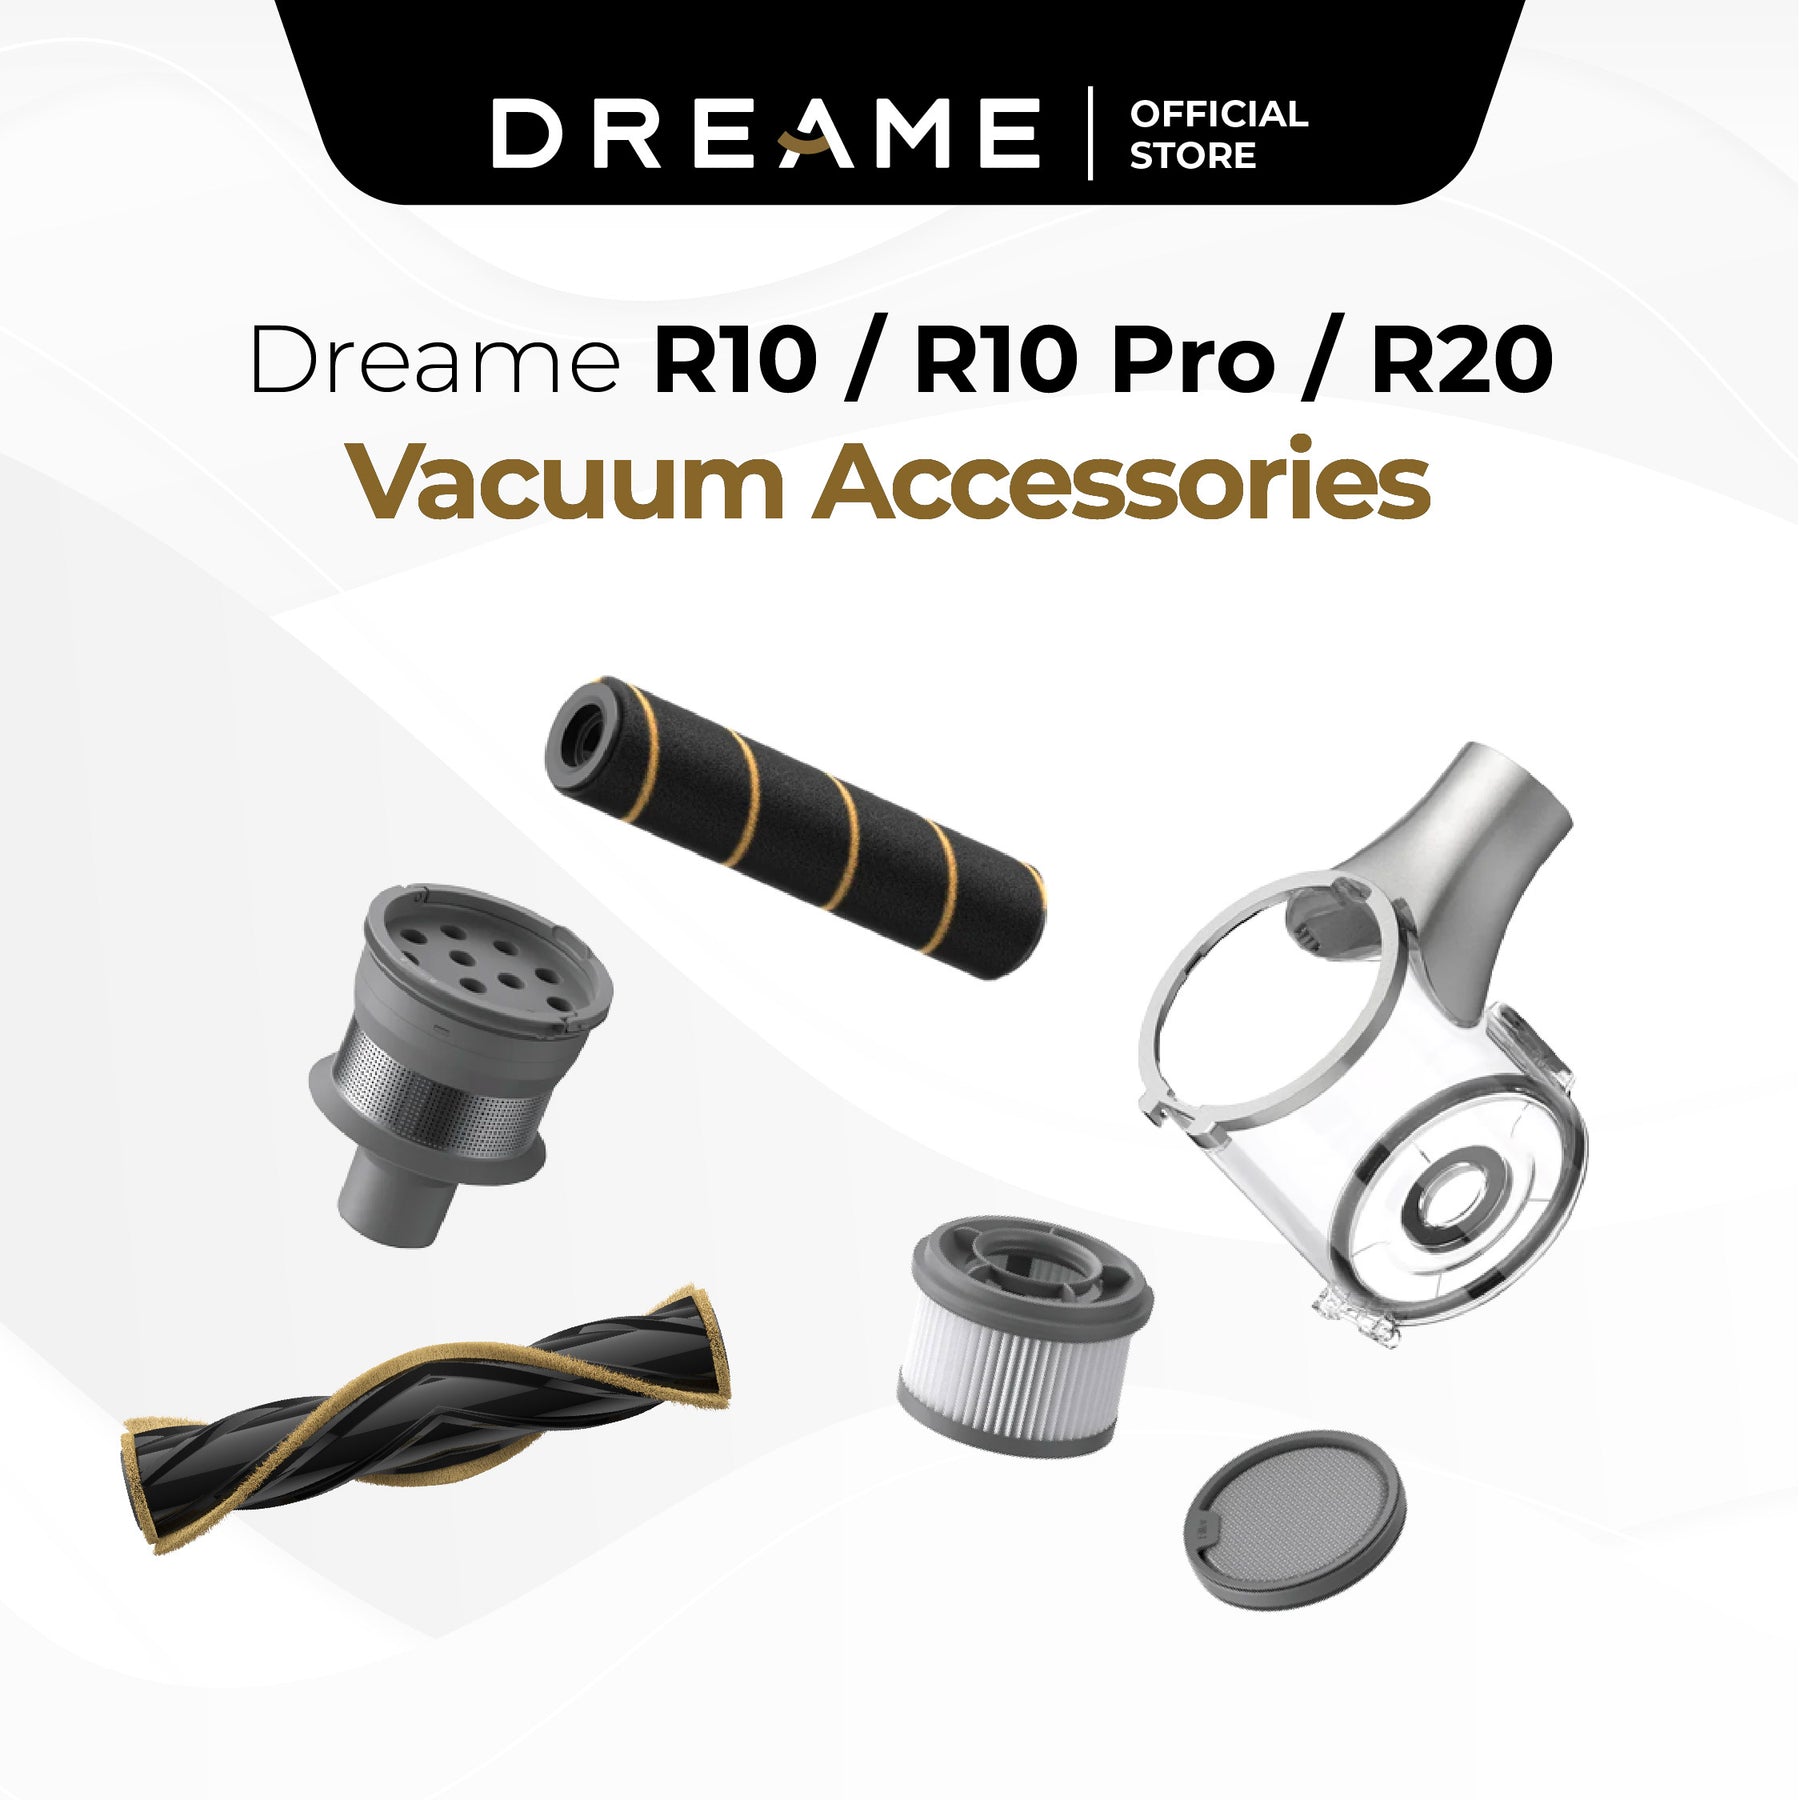 Dreame R10/R10 Pro/R20 Cordless Stick Vacuum Cleaner Accessories | Battery Pack, Hepa Filter Replacement